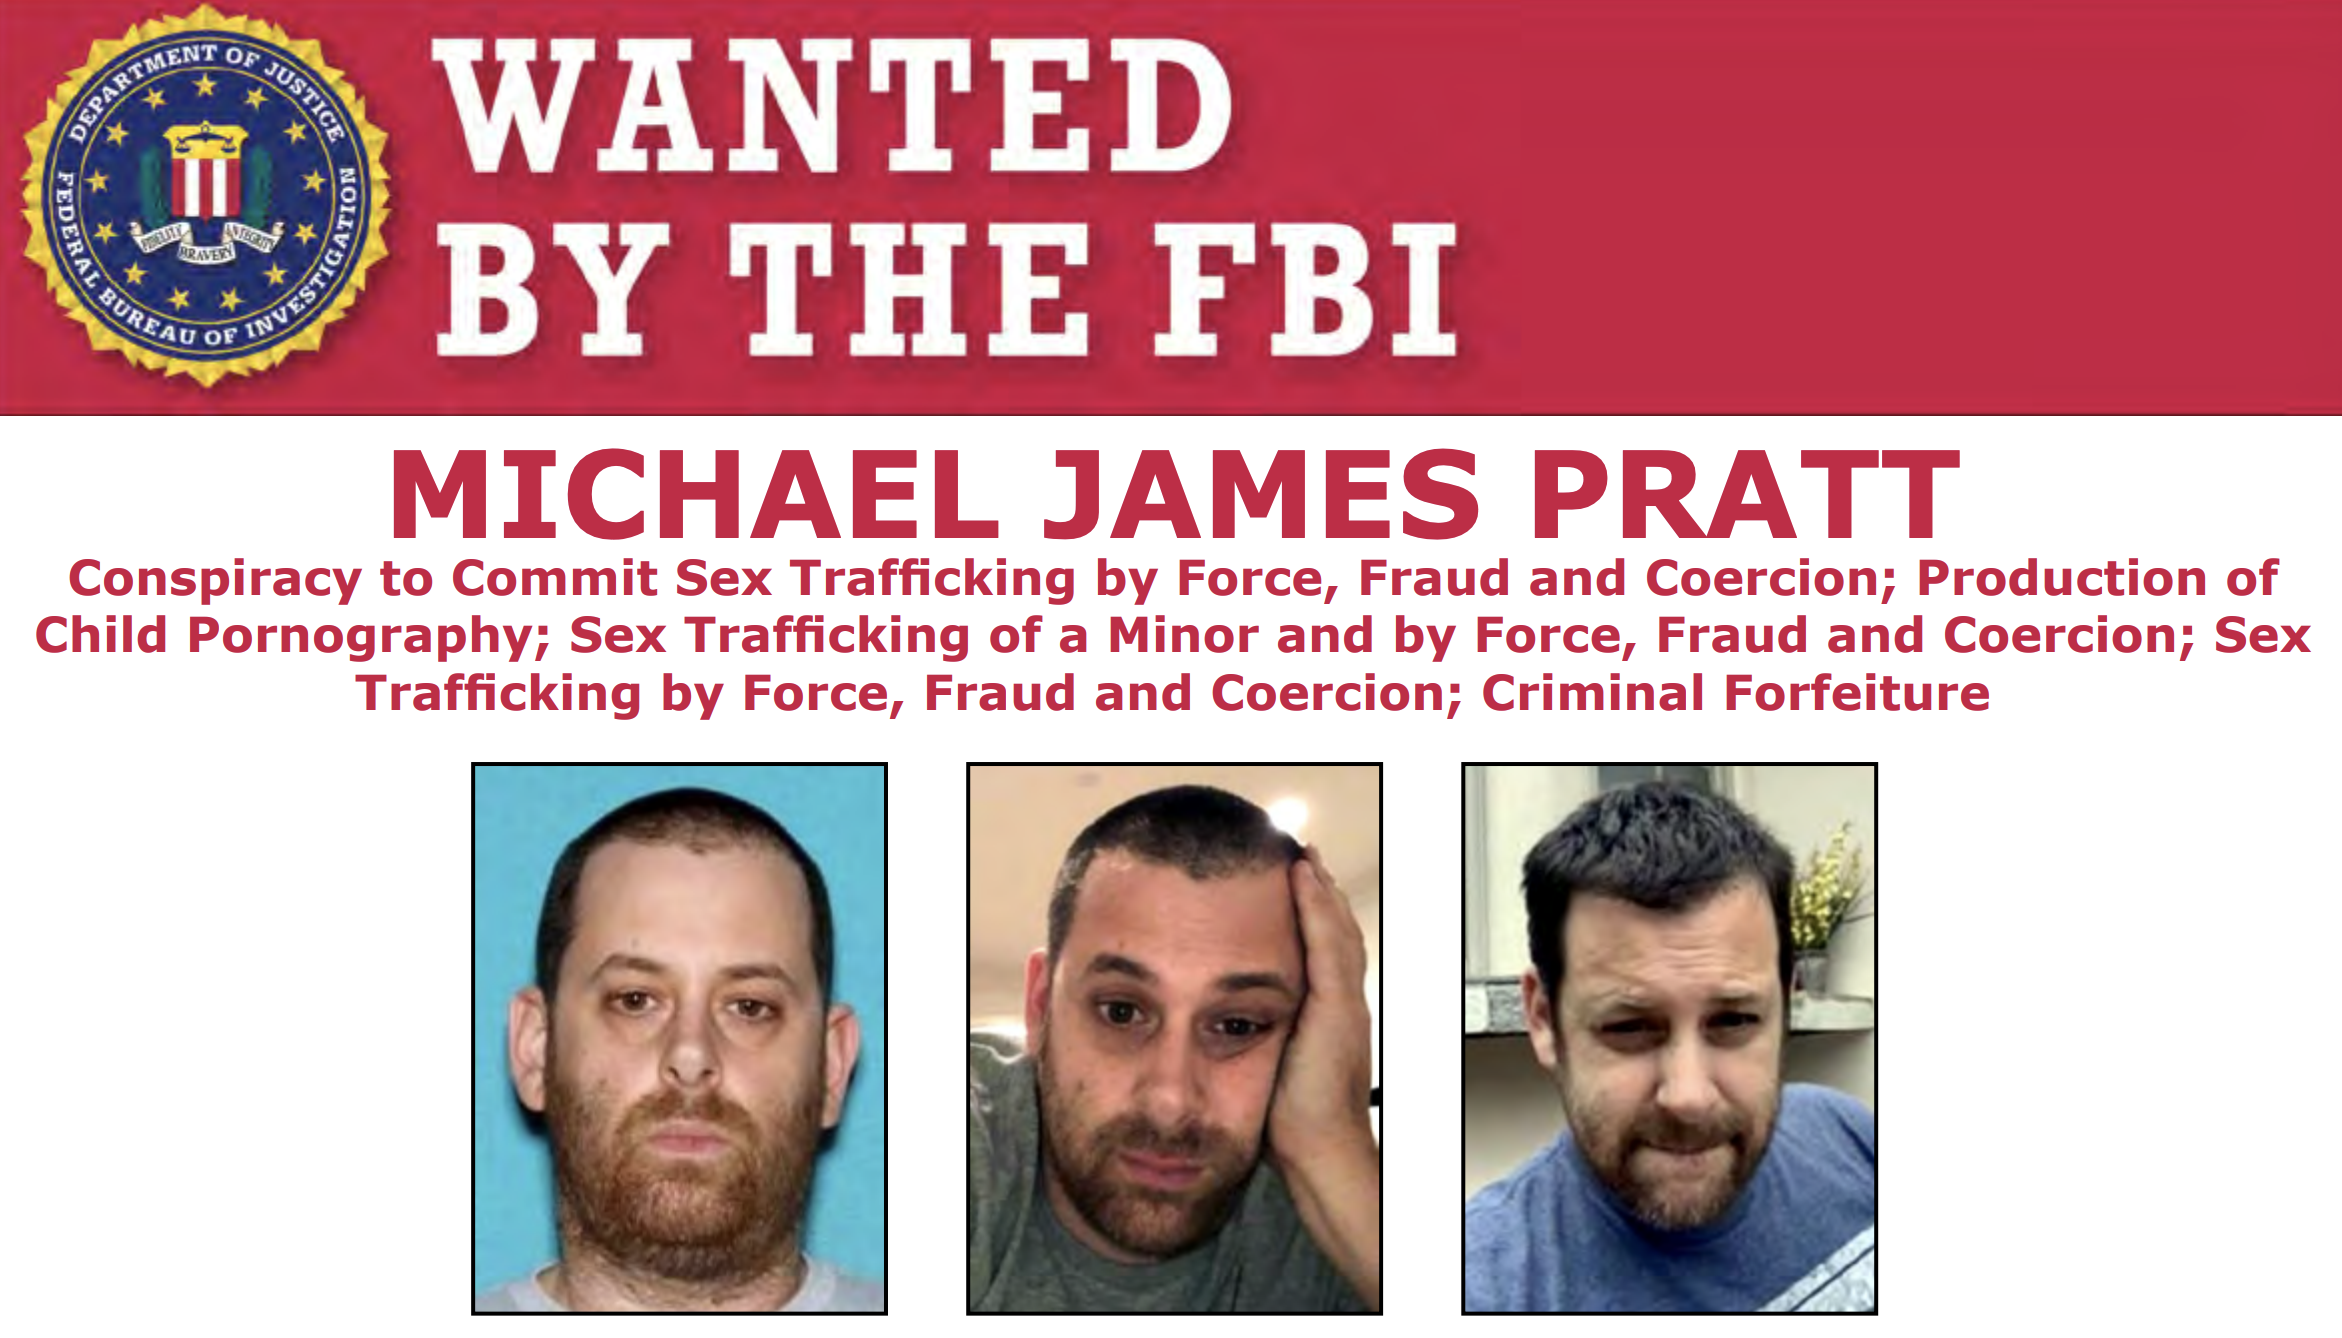 Fbi Seeking Publics Assistance To Locate Michael James Pratt Wanted For Sex Trafficking And